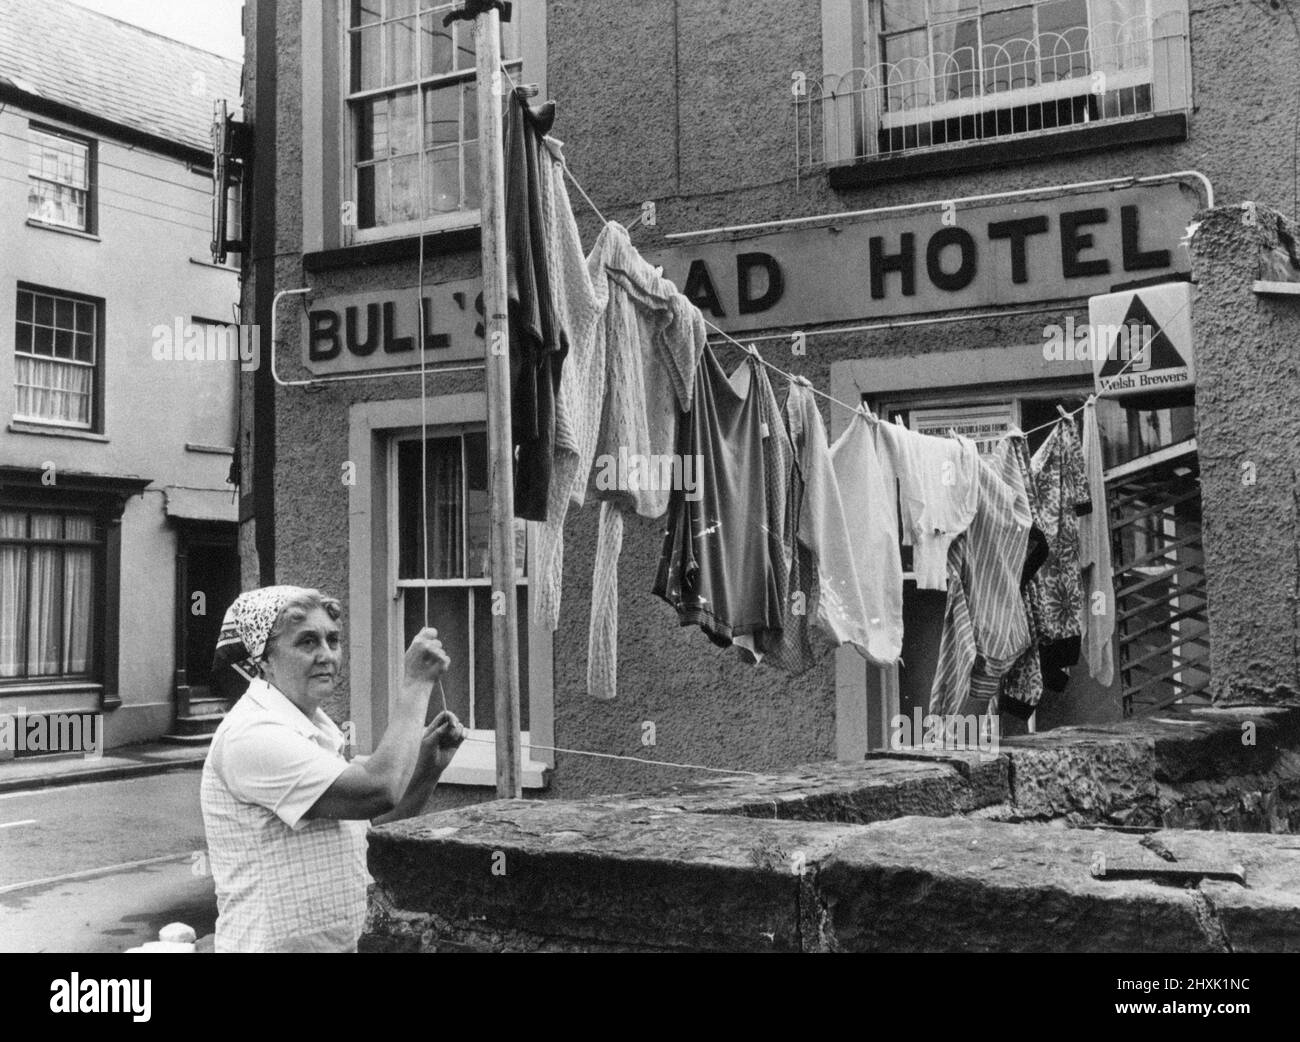 Hotel Landlady Mrs Maureen Roach puts up another line of washing outside the Bull's Head Hotel, Brecon, a market town and community in Powys, Mid Wales, 25th July 1977. Stock Photo